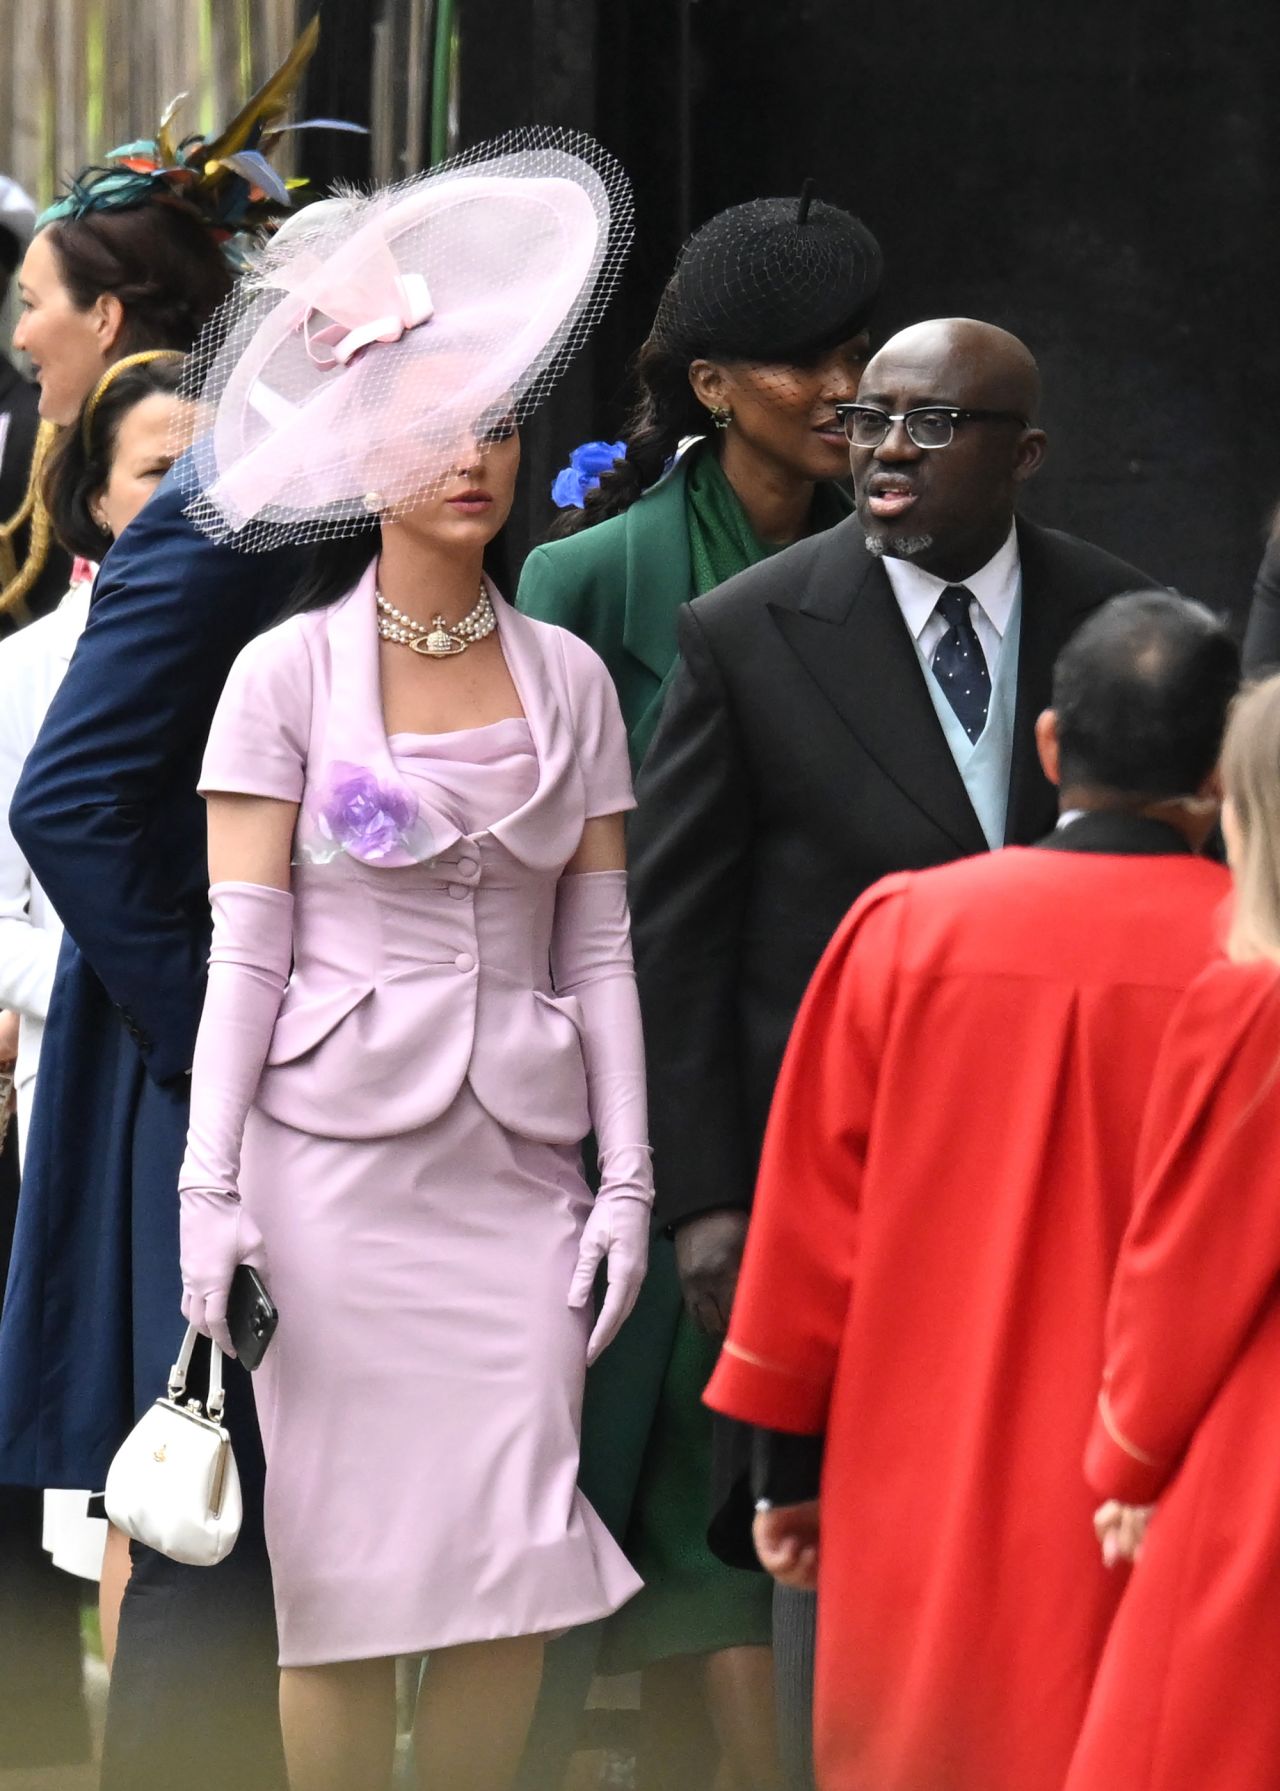 Katy Perry and Edward Enninful arrive in his-and-hers baby pink and blue looks.